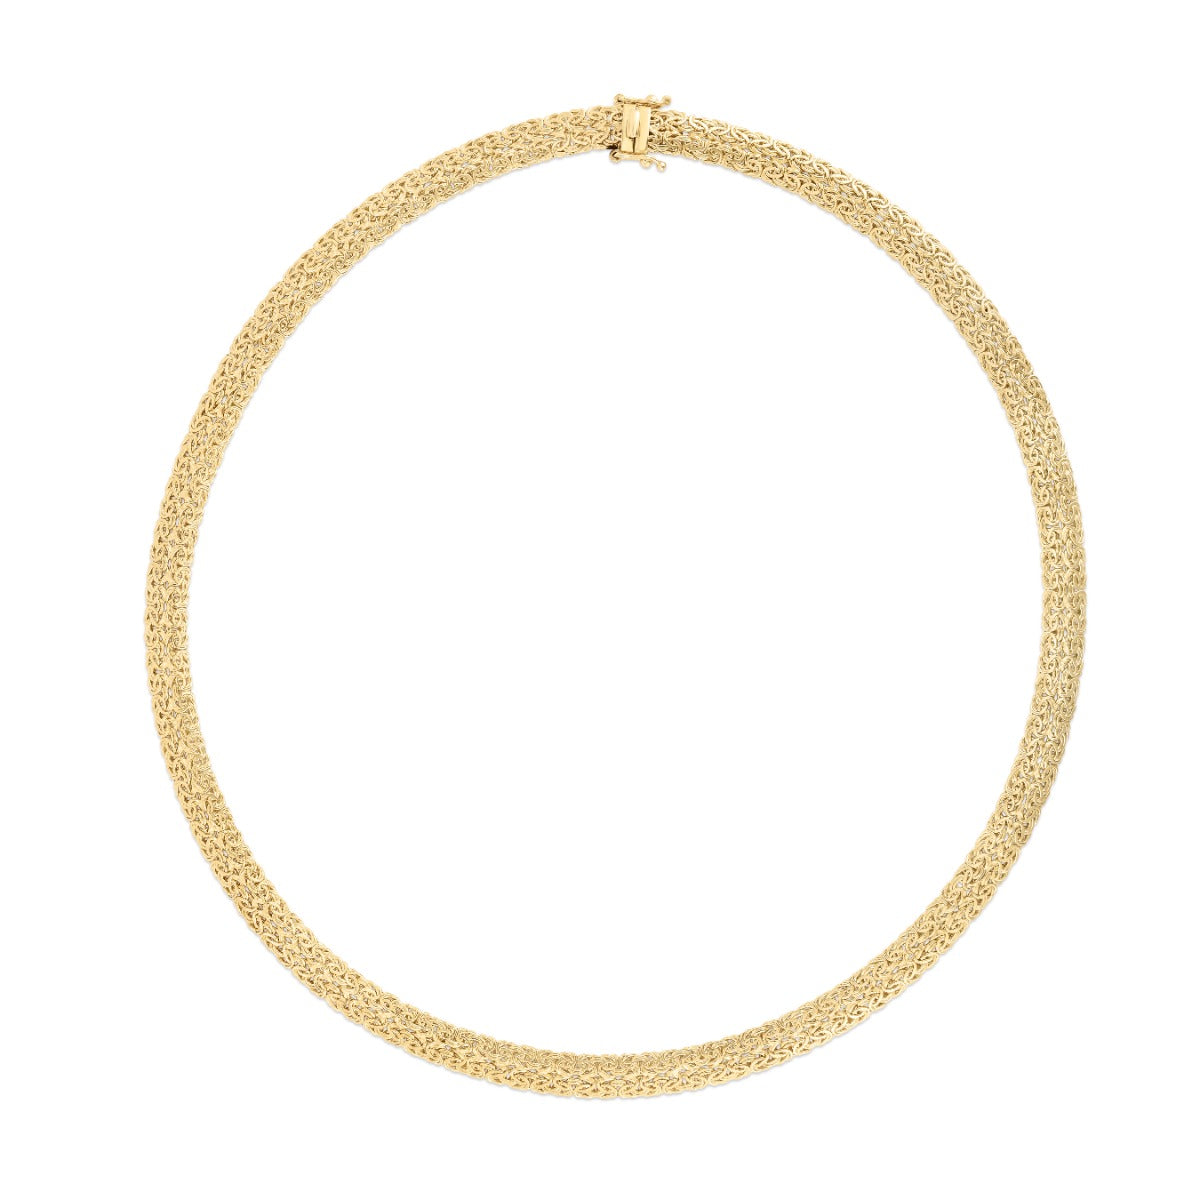 14K Gold Byzantine Mesh Chain Necklace with Box Clasp